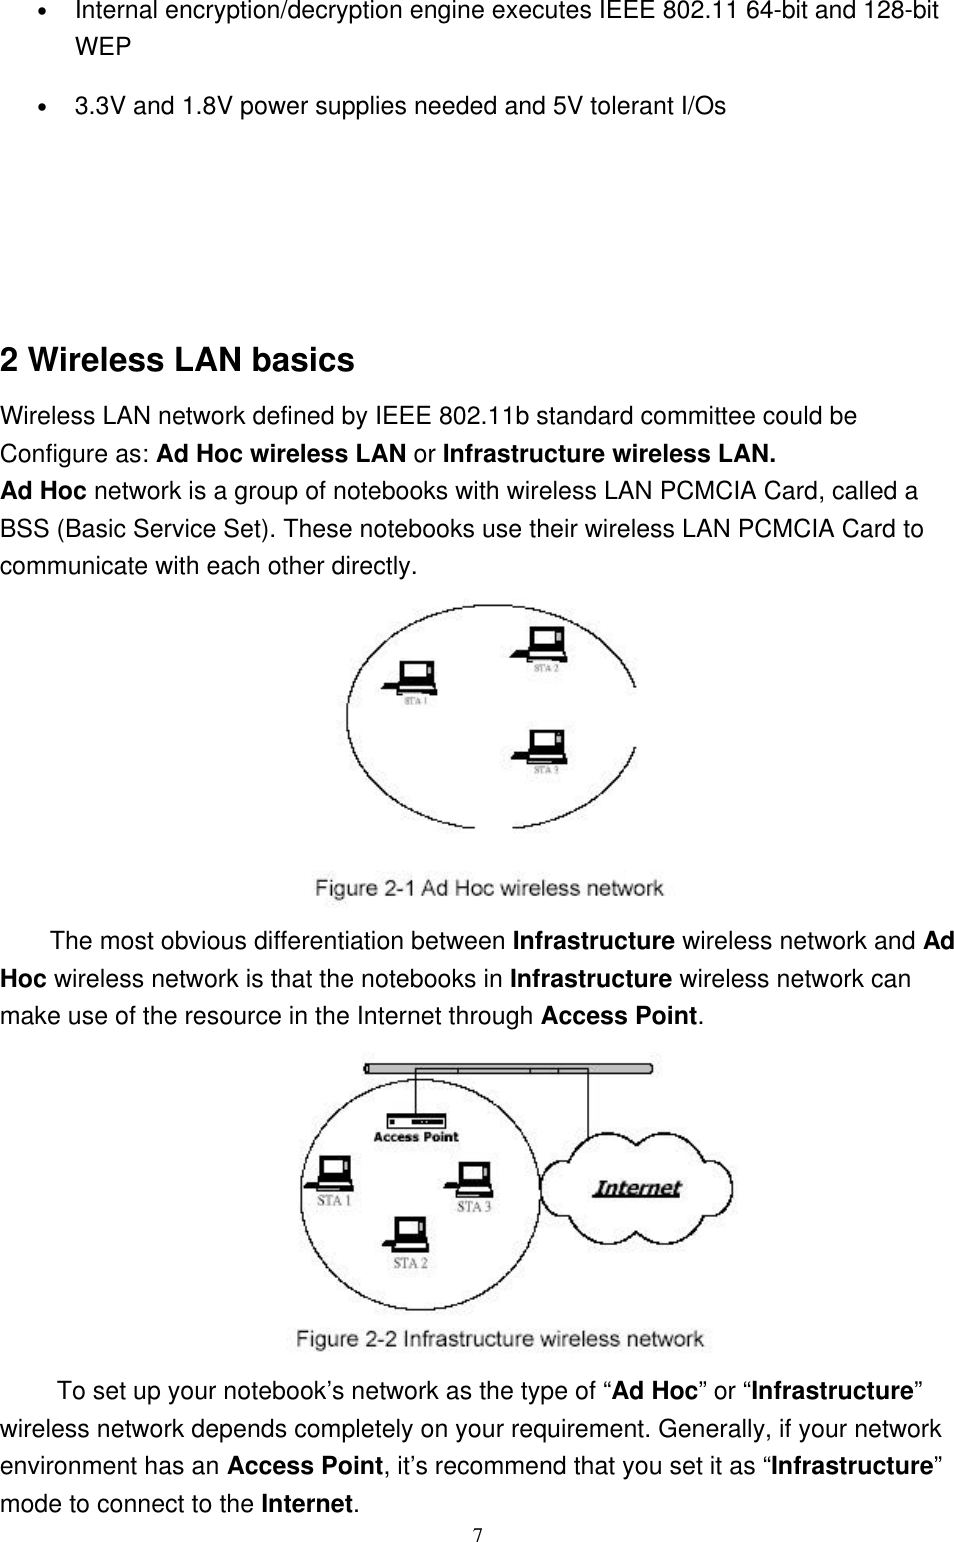 7• Internal encryption/decryption engine executes IEEE 802.11 64-bit and 128-bitWEP• 3.3V and 1.8V power supplies needed and 5V tolerant I/Os2 Wireless LAN basicsWireless LAN network defined by IEEE 802.11b standard committee could beConfigure as: Ad Hoc wireless LAN or Infrastructure wireless LAN.Ad Hoc network is a group of notebooks with wireless LAN PCMCIA Card, called aBSS (Basic Service Set). These notebooks use their wireless LAN PCMCIA Card tocommunicate with each other directly.The most obvious differentiation between Infrastructure wireless network and AdHoc wireless network is that the notebooks in Infrastructure wireless network canmake use of the resource in the Internet through Access Point. To set up your notebook’s network as the type of “Ad Hoc” or “Infrastructure”wireless network depends completely on your requirement. Generally, if your networkenvironment has an Access Point, it’s recommend that you set it as “Infrastructure”mode to connect to the Internet.